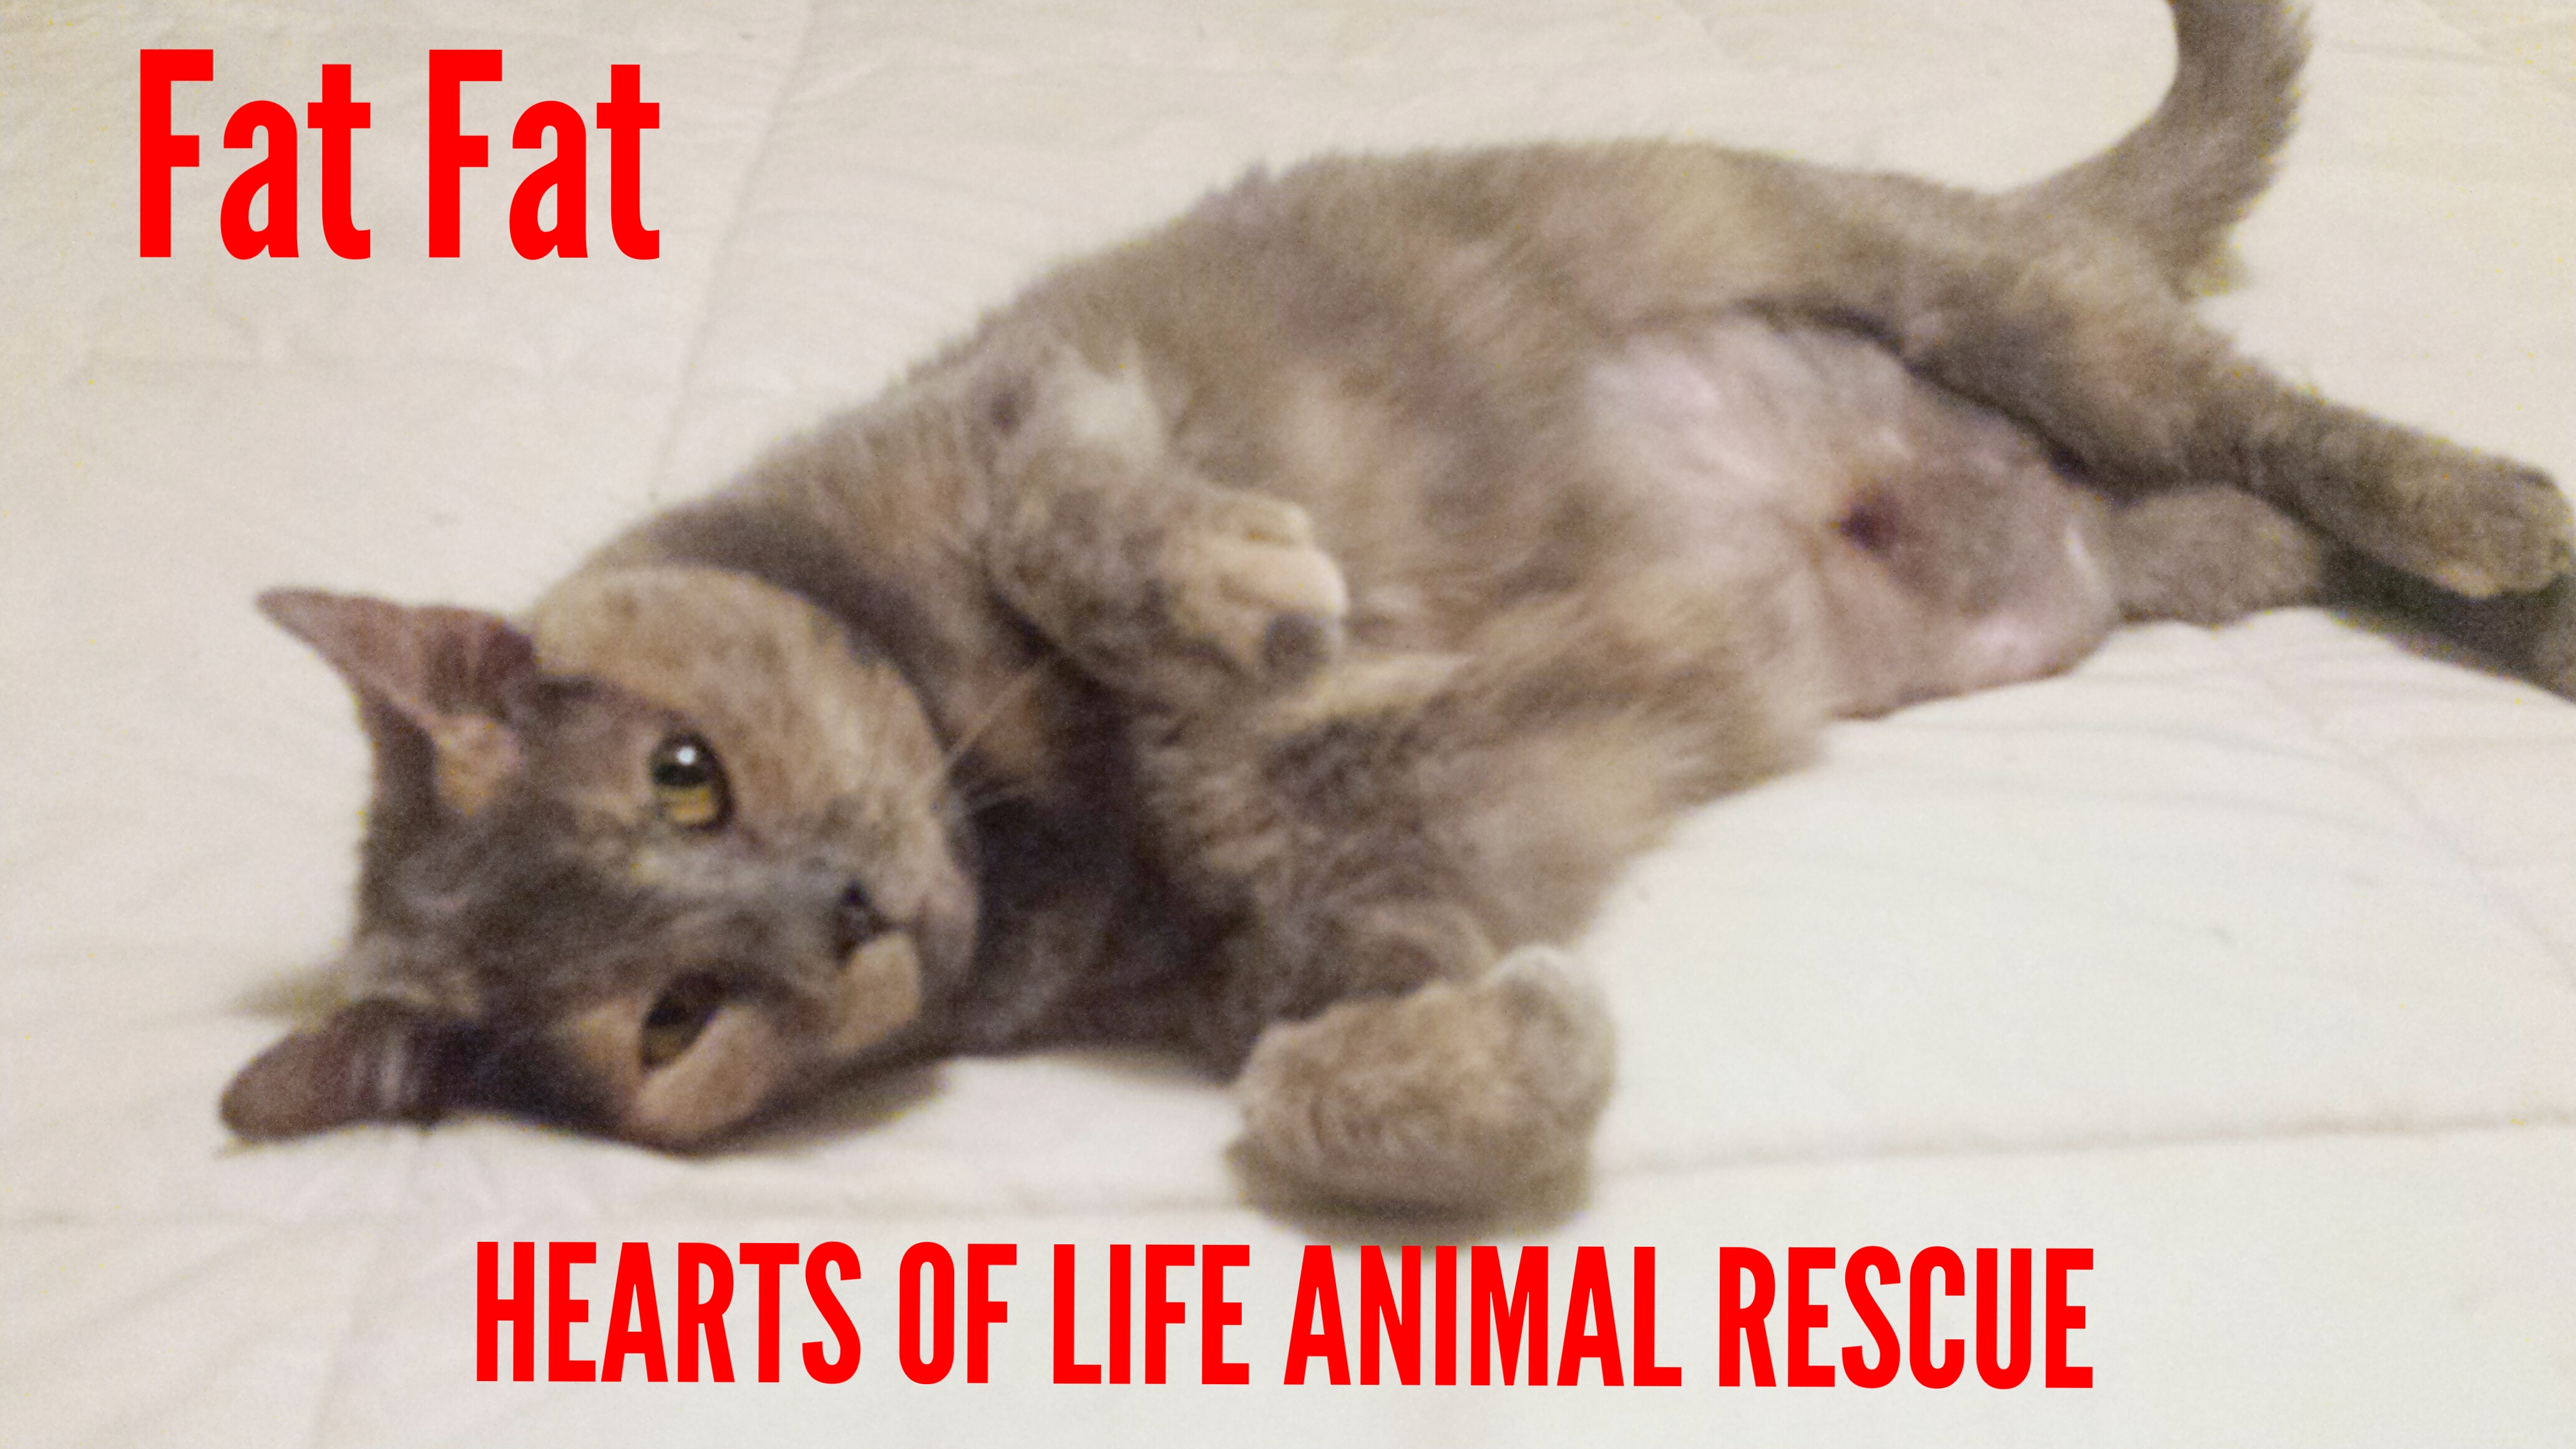 Hearts of Life Animal Rescue Cat of the Week: Meet Fat Fat!